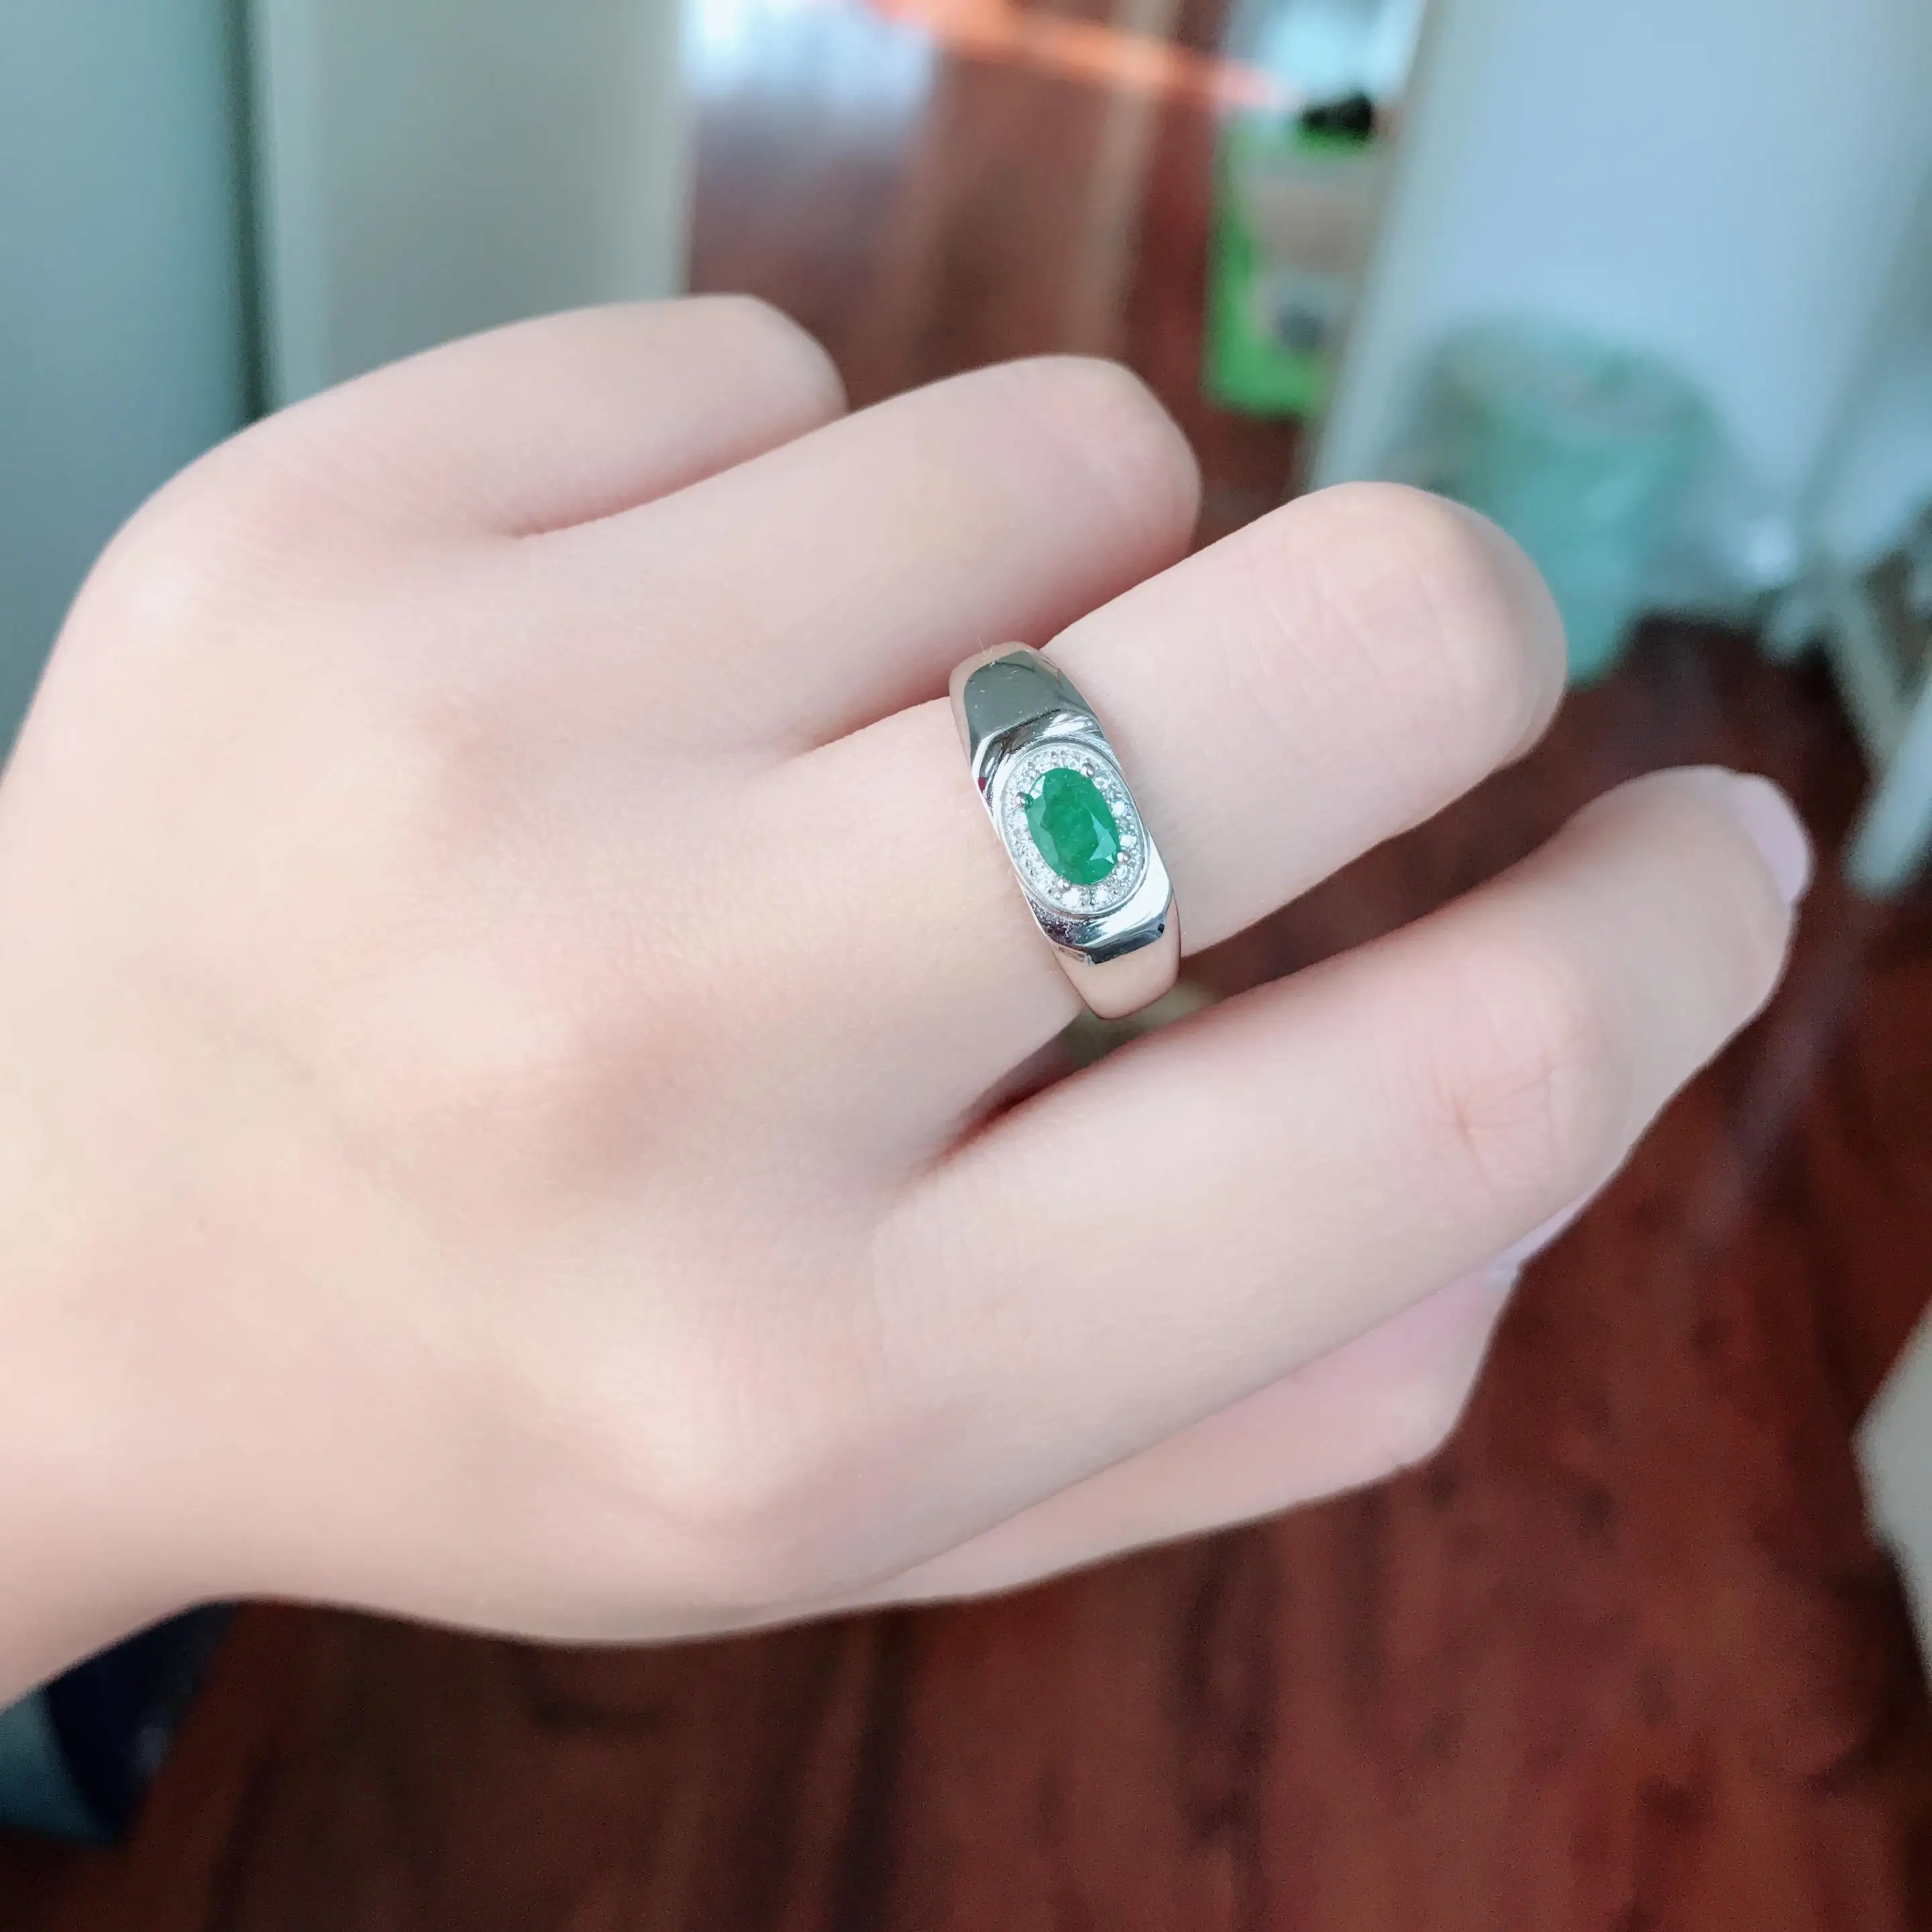 Al emerald ring 4 mm 5mm genuine emerald silver ring sterling silver emerald engagement thumb200